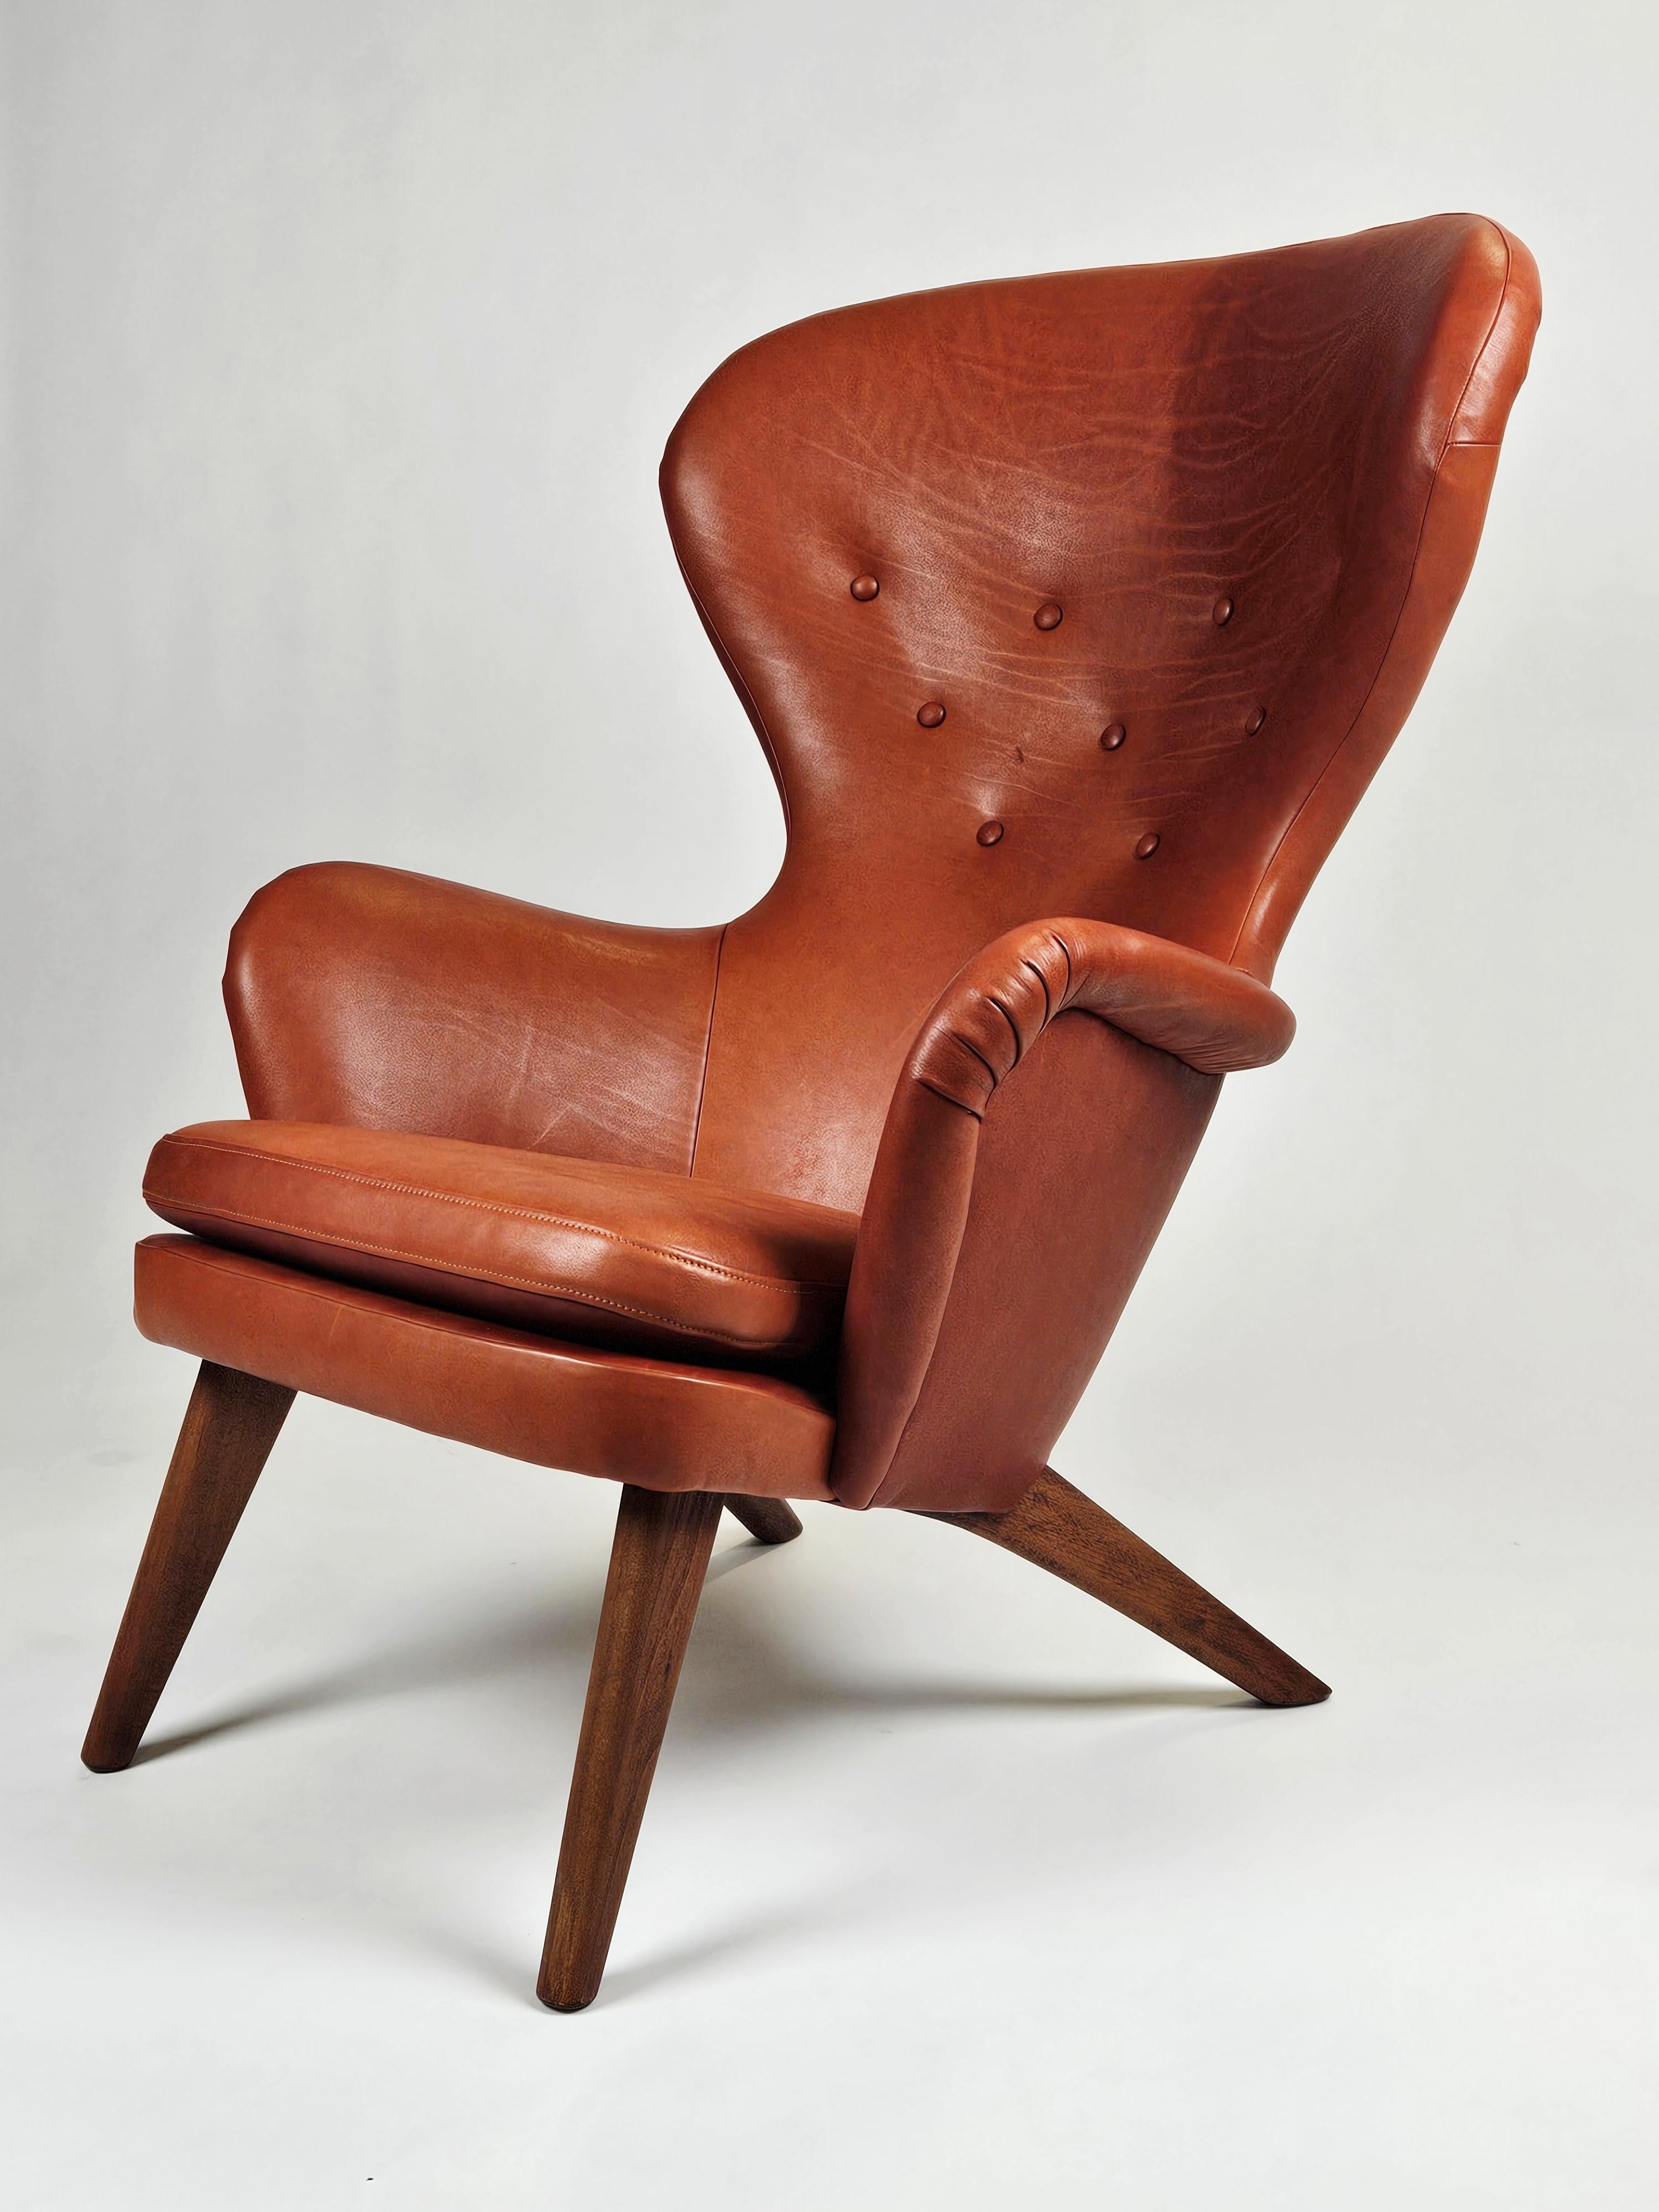 'Siesta' lounge chair designed by Gustaf Hiort af Ornäs. A bold organic design that still allures 70 years after its release in 1952.

This chair is an early production and comes with a beautiful cognac colored leather.